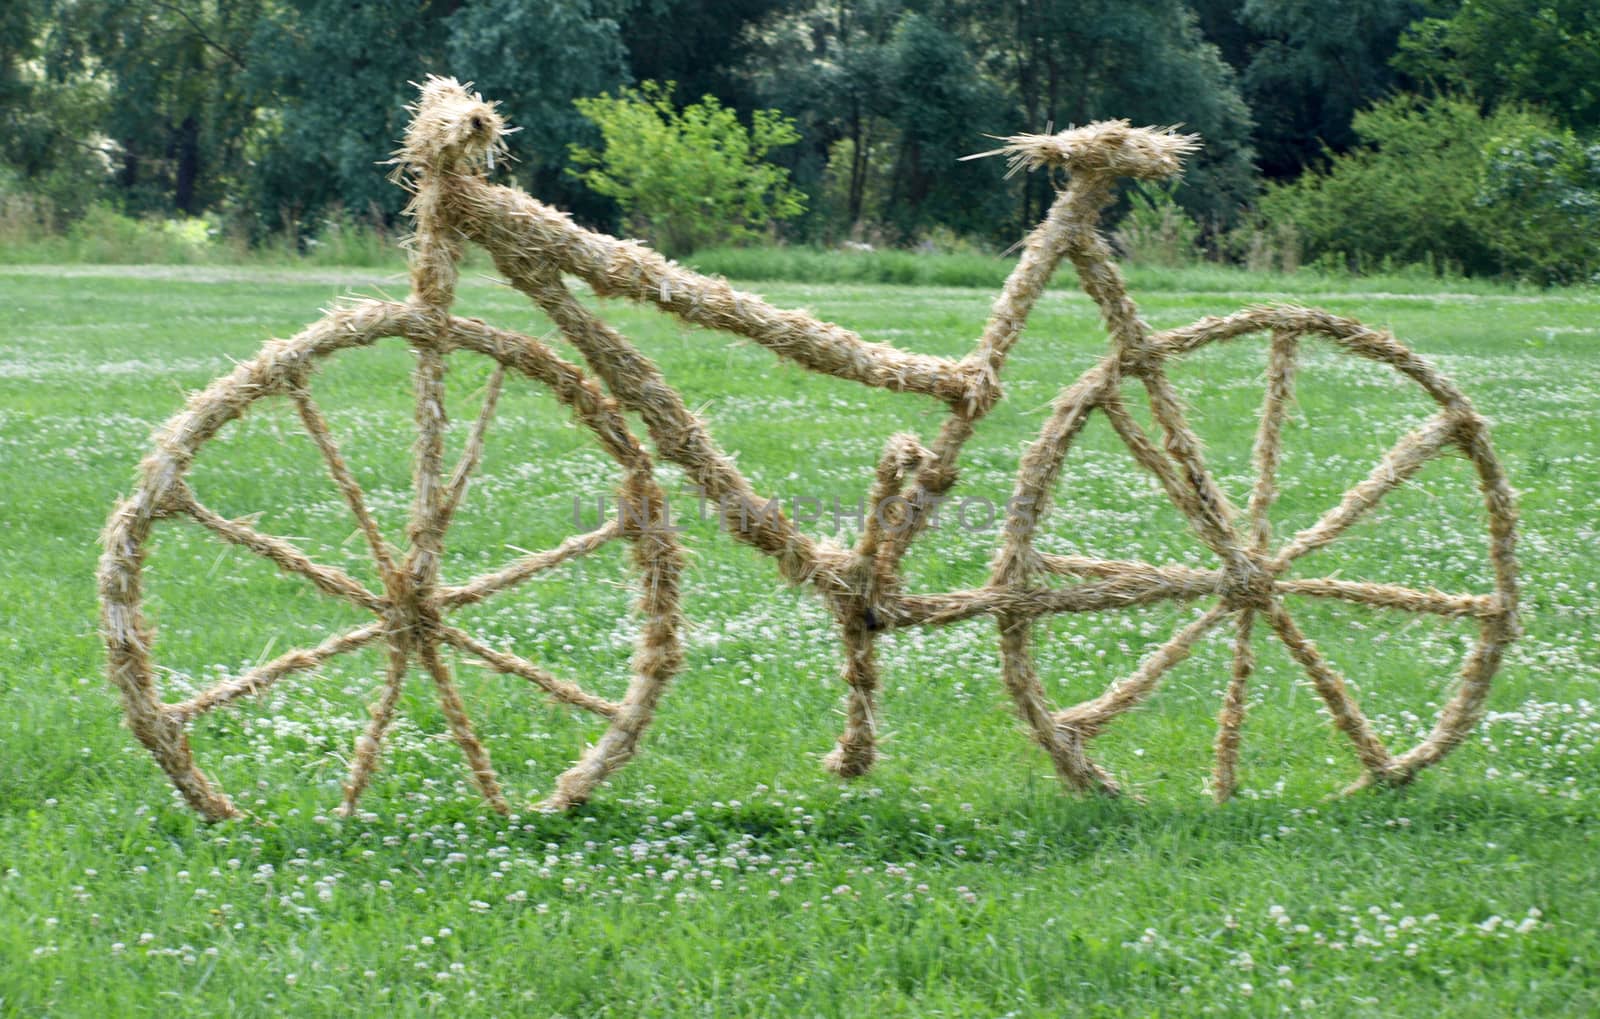 bike sculpture of straw on the lawn     